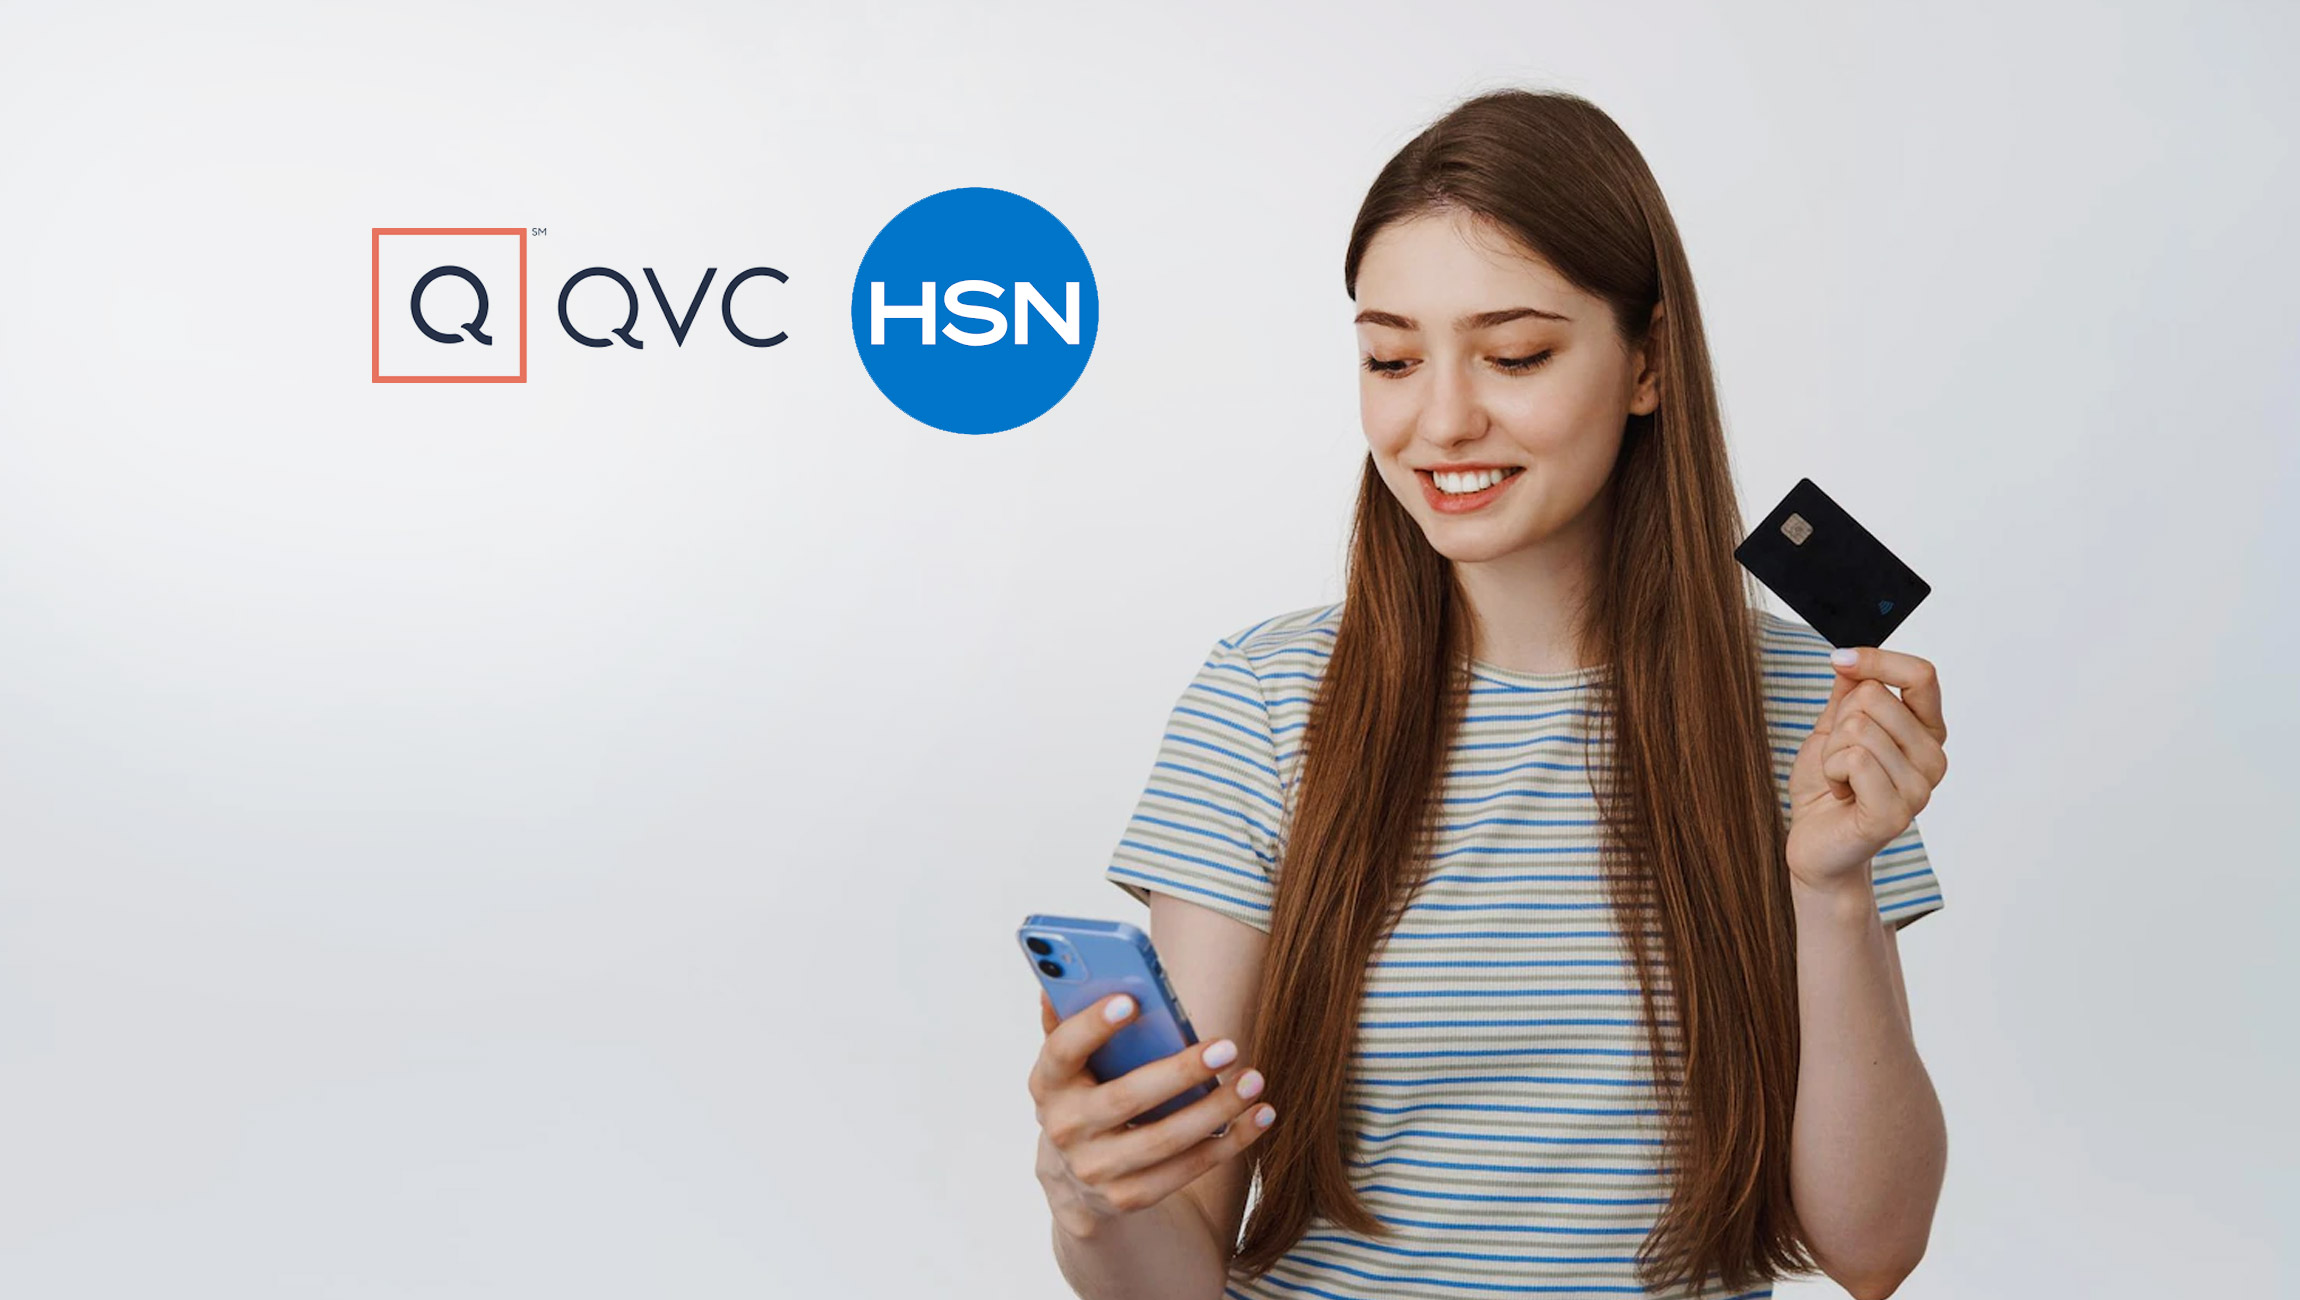 AT&T TV NOW Adds QVC & HSN